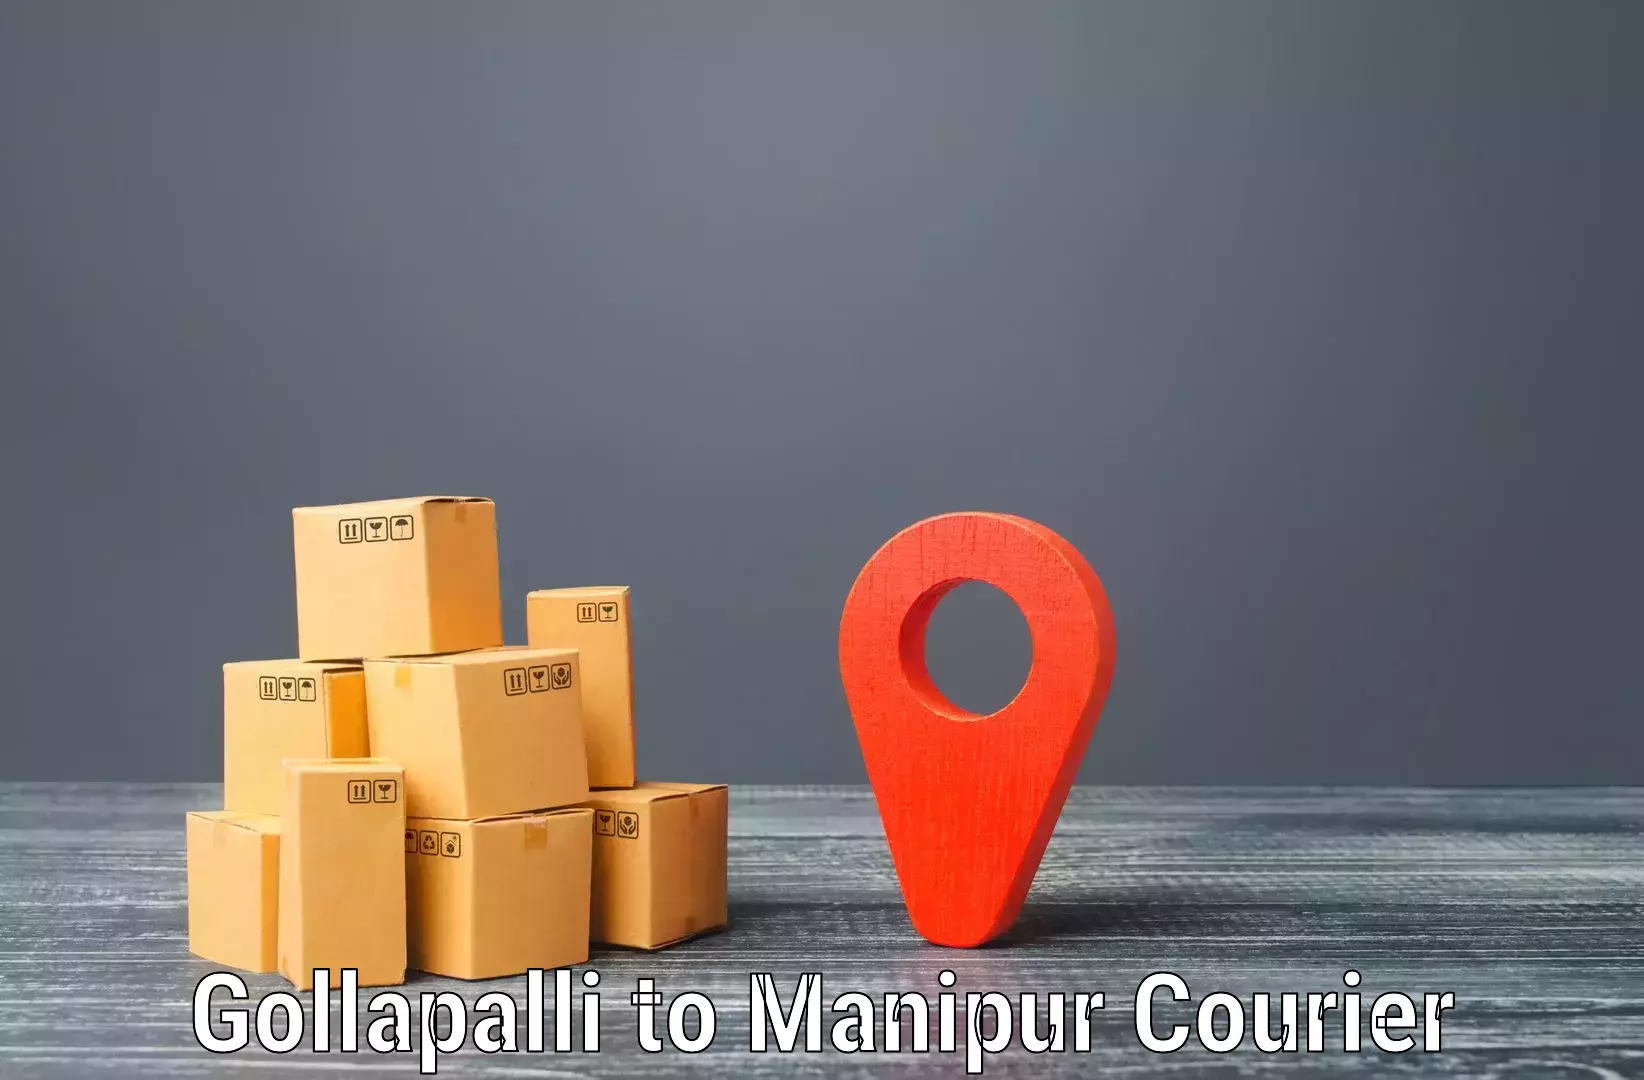 Seamless shipping experience Gollapalli to Tamenglong